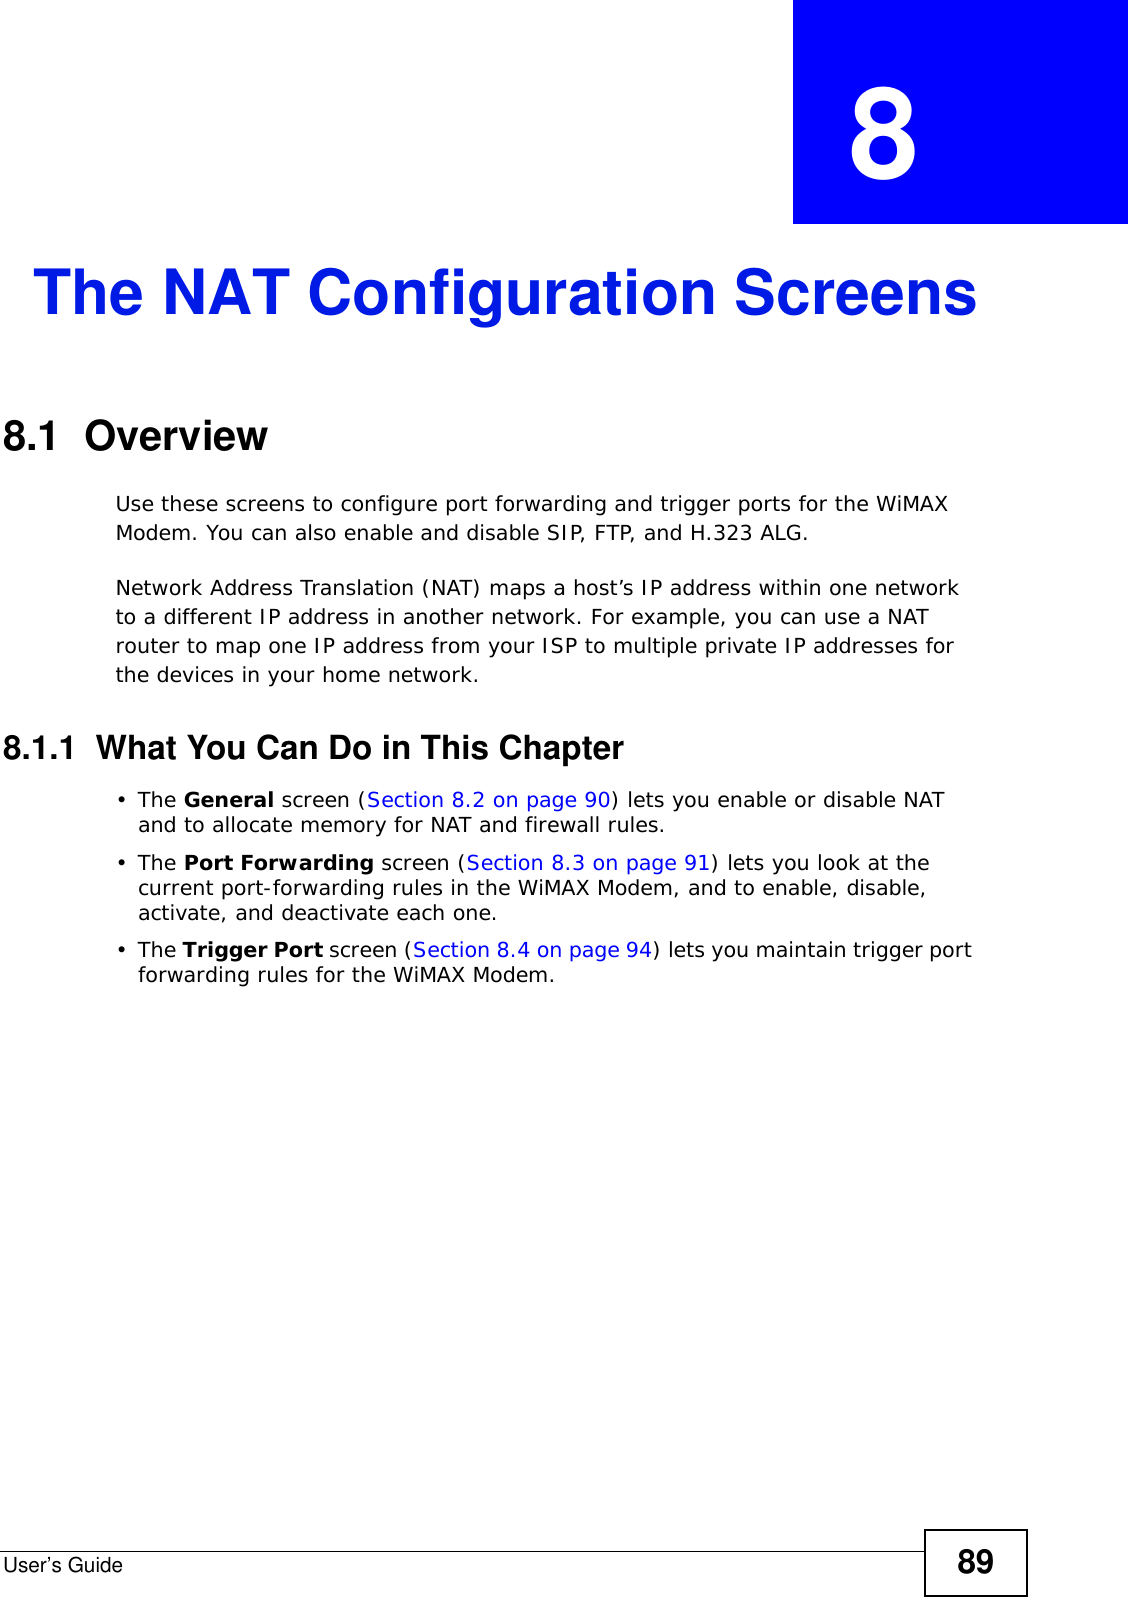 User’s Guide 89CHAPTER  8 The NAT Configuration Screens8.1  OverviewUse these screens to configure port forwarding and trigger ports for the WiMAX Modem. You can also enable and disable SIP, FTP, and H.323 ALG.Network Address Translation (NAT) maps a host’s IP address within one network to a different IP address in another network. For example, you can use a NAT router to map one IP address from your ISP to multiple private IP addresses for the devices in your home network.8.1.1  What You Can Do in This Chapter•The General screen (Section 8.2 on page 90) lets you enable or disable NAT and to allocate memory for NAT and firewall rules.•The Port Forwarding screen (Section 8.3 on page 91) lets you look at the current port-forwarding rules in the WiMAX Modem, and to enable, disable, activate, and deactivate each one.•The Trigger Port screen (Section 8.4 on page 94) lets you maintain trigger port forwarding rules for the WiMAX Modem.